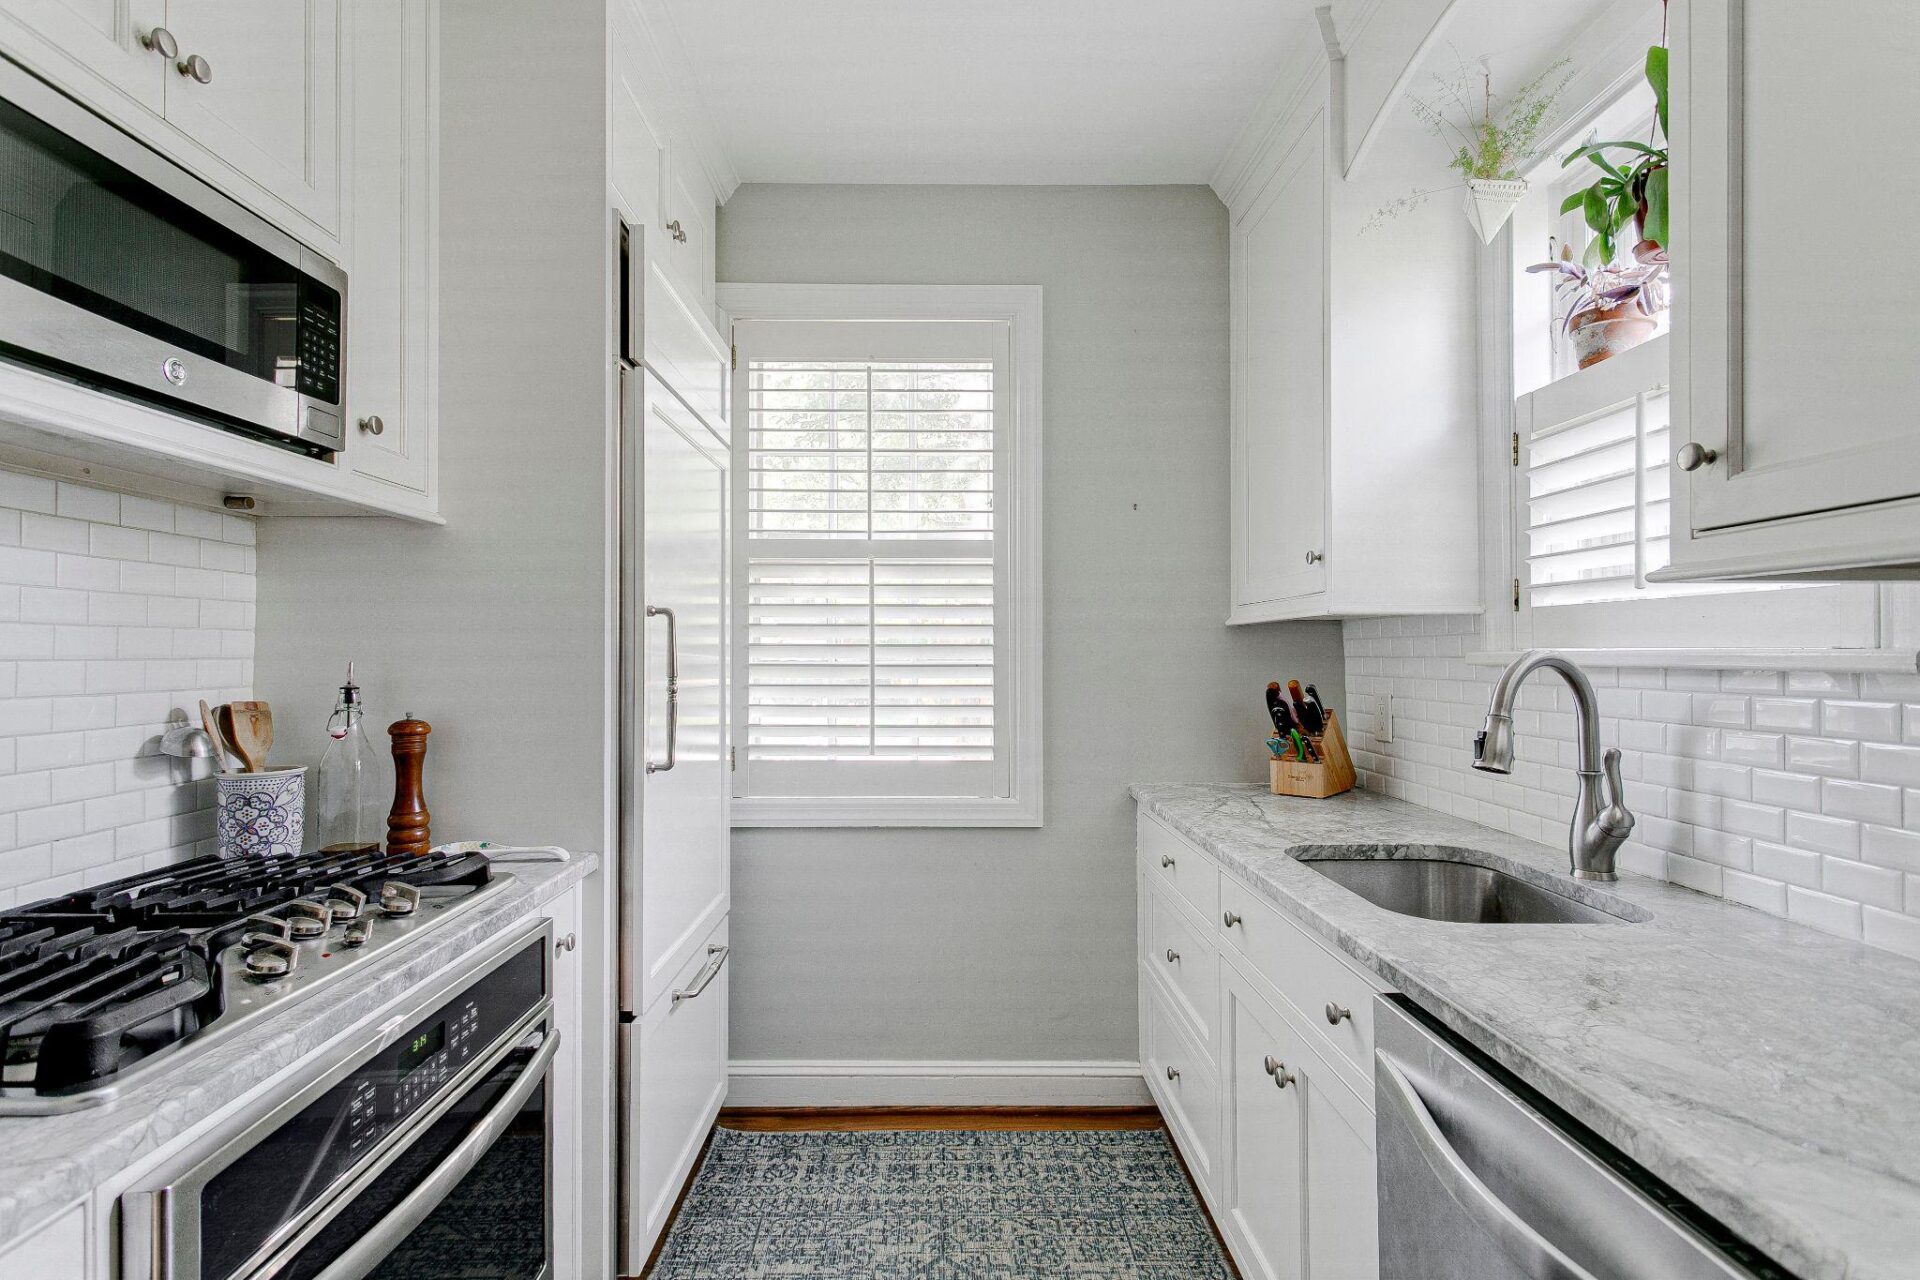 Adding Beauty and Value with Plantation Shutters